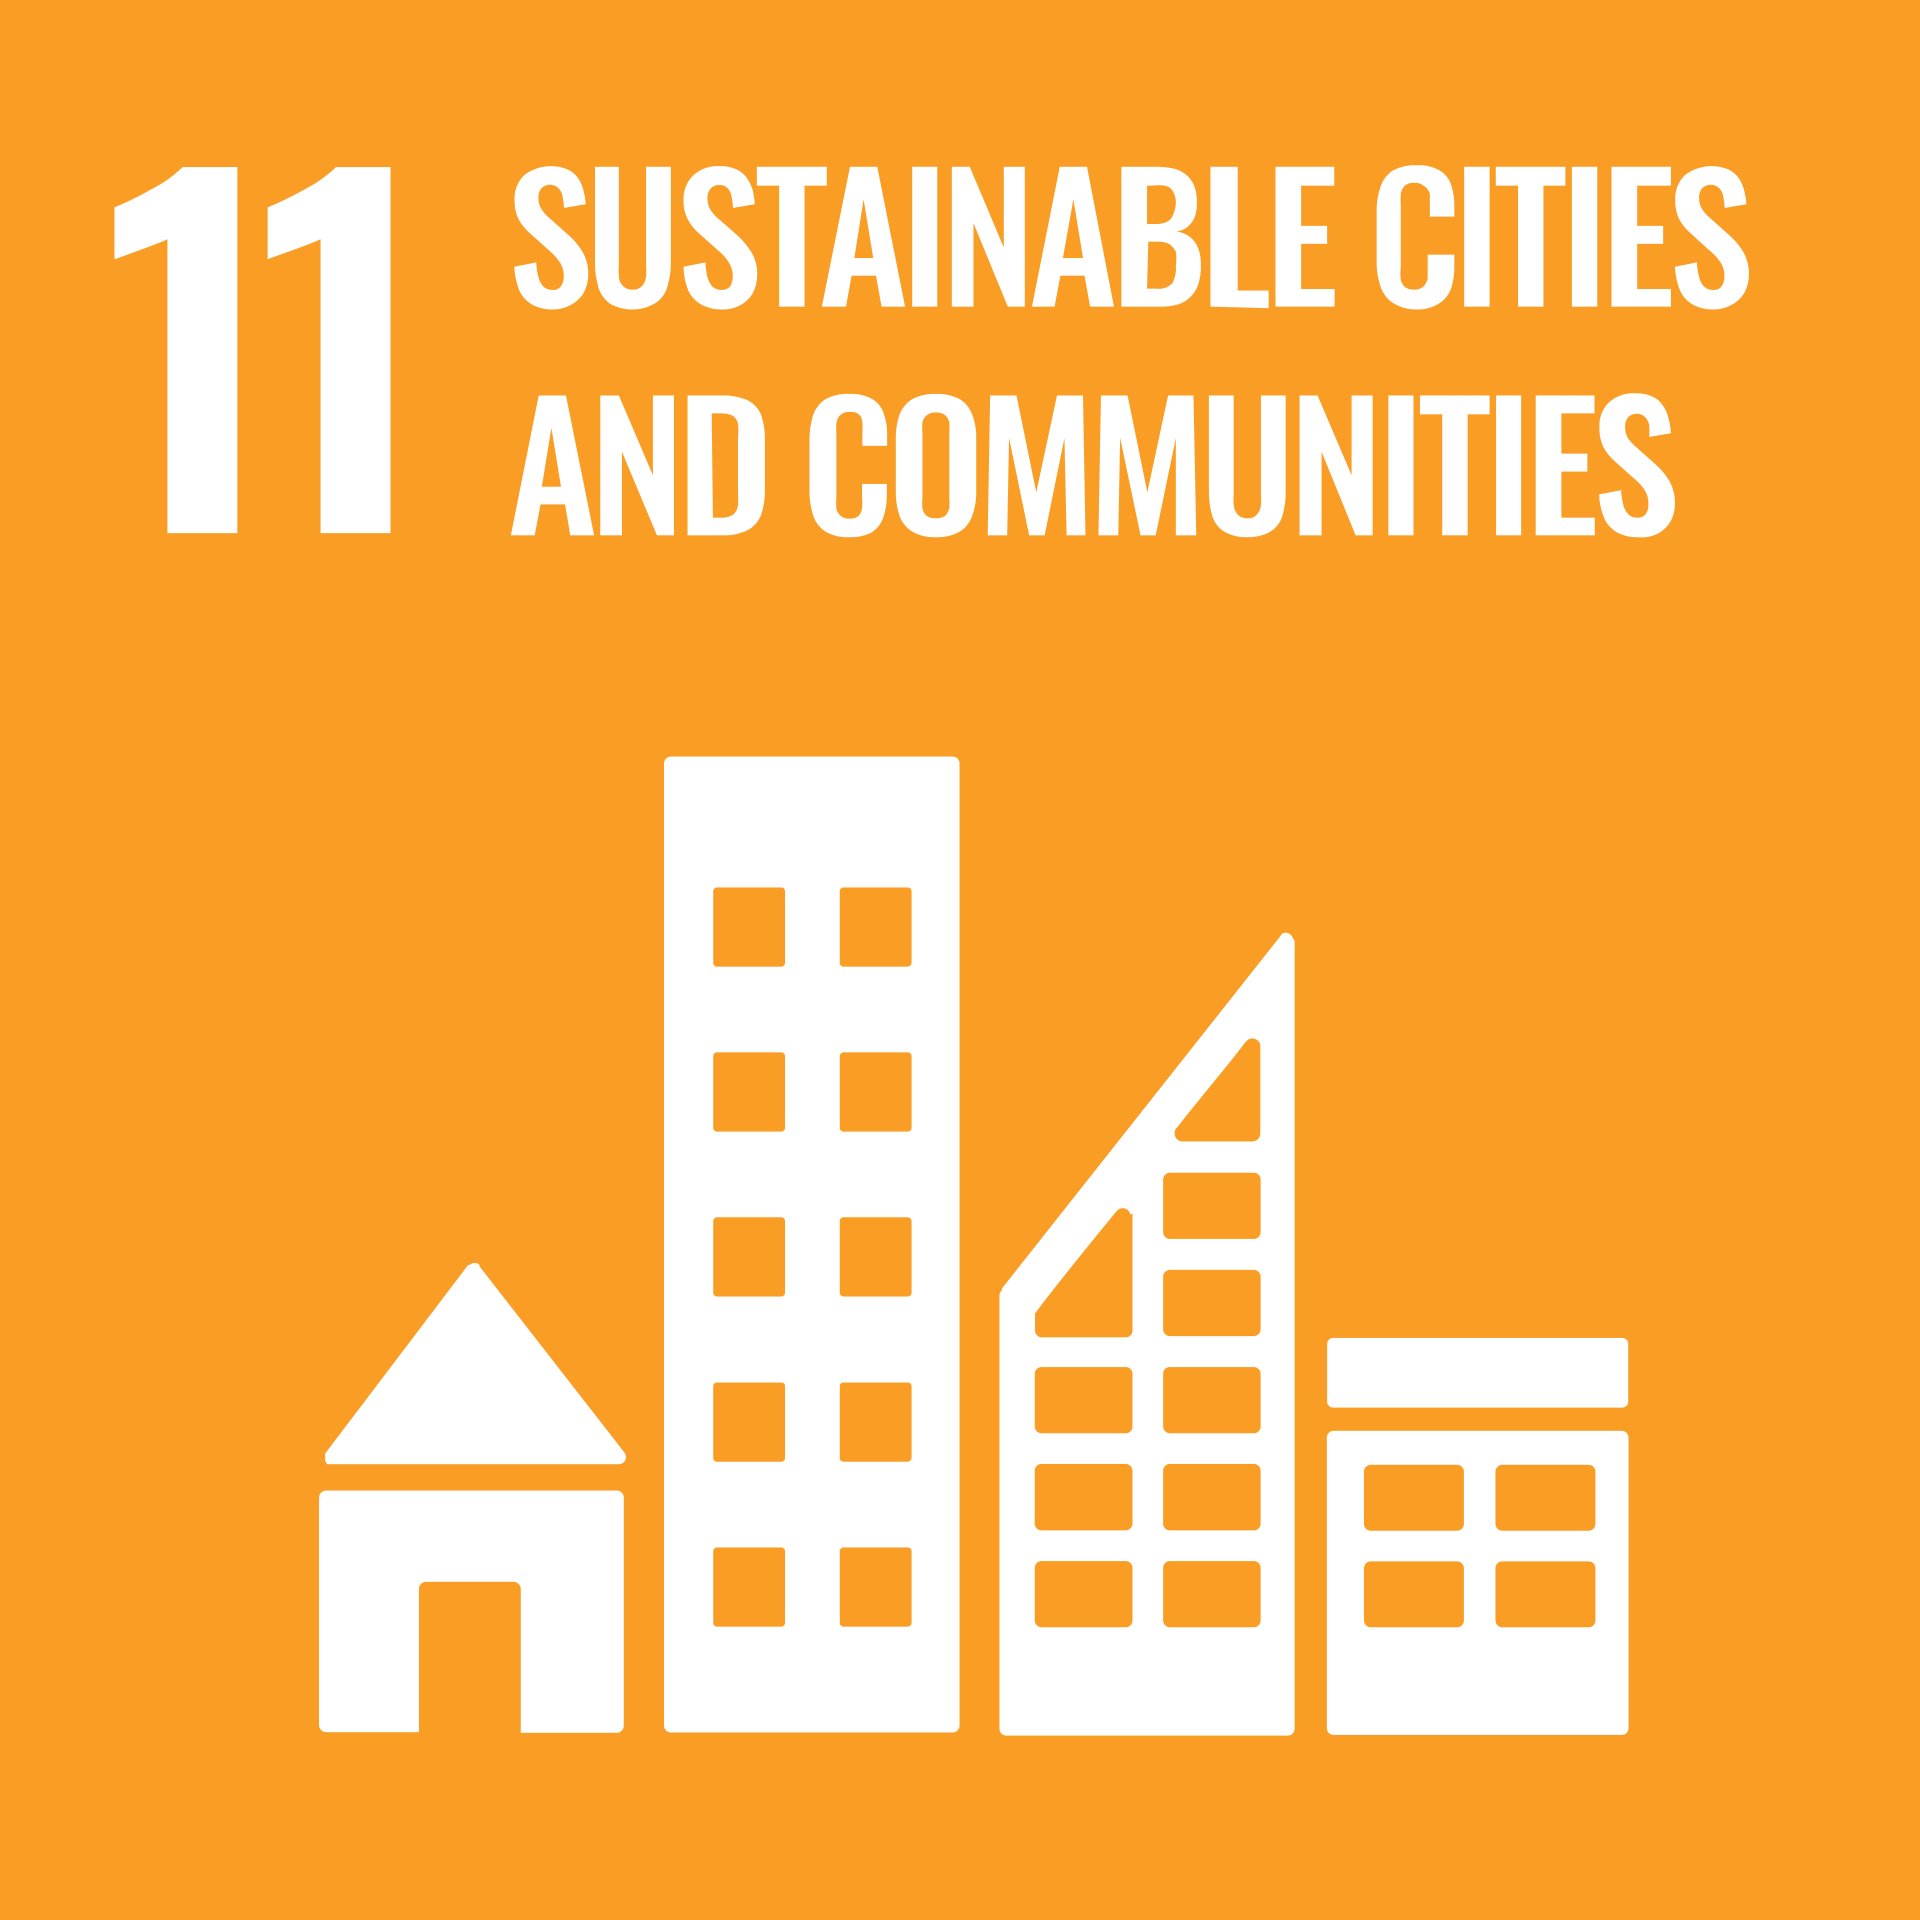 SDG Goal 11. Make cities and human settlements inclusive, safe, resilient and sustainable